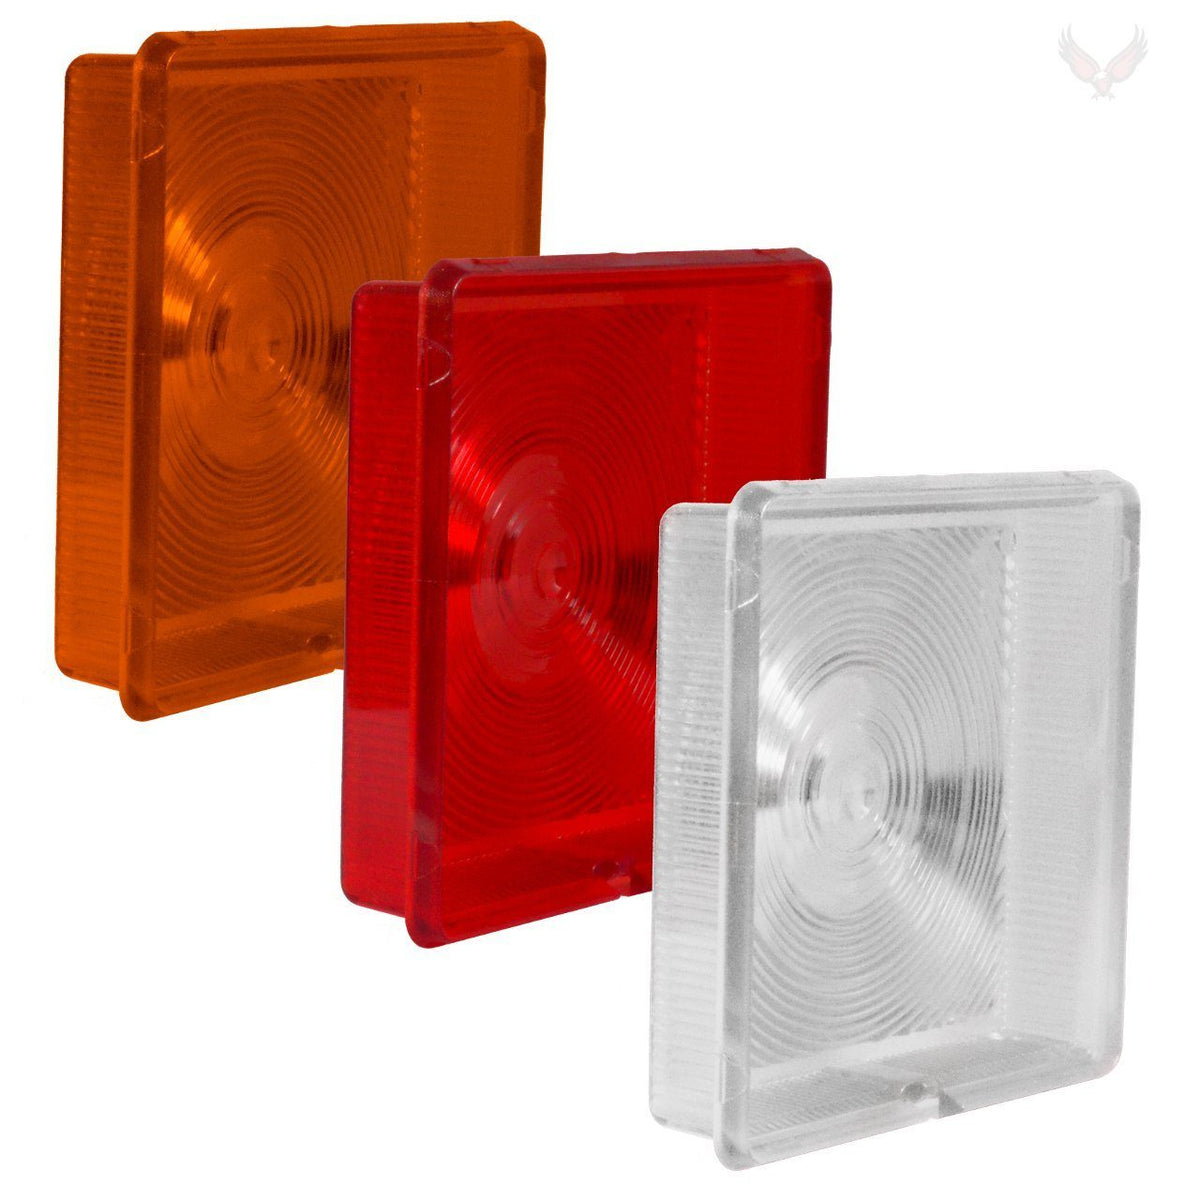 Rubbolite - Genuine Rubbolite 4" Square 3 Lens Replacement Set | Red, Amber And Clear